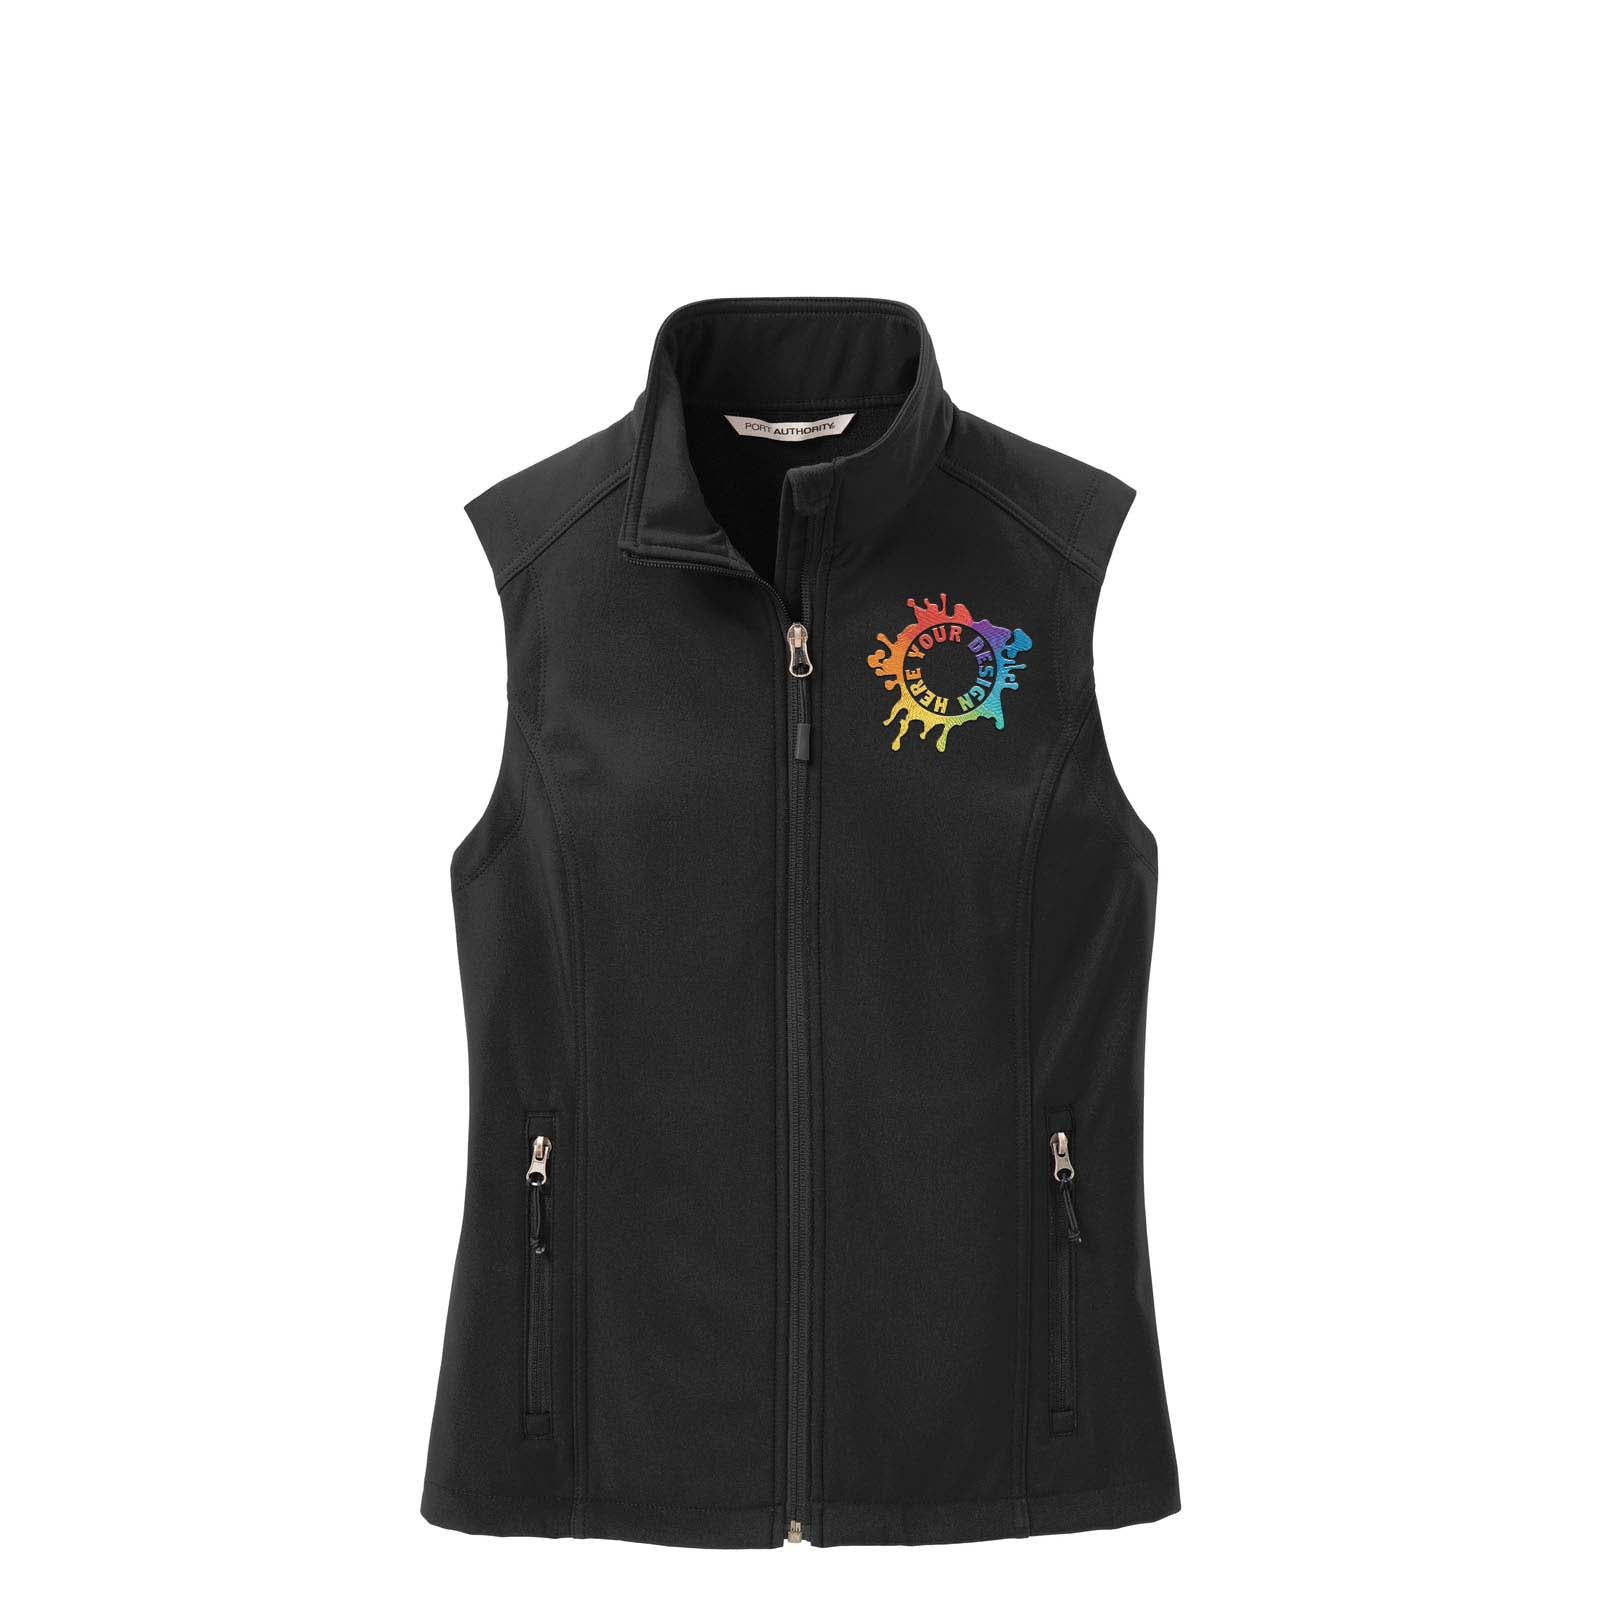 Port Authority® Ladies Core Soft Shell Vest Embroidery - Mato & Hash